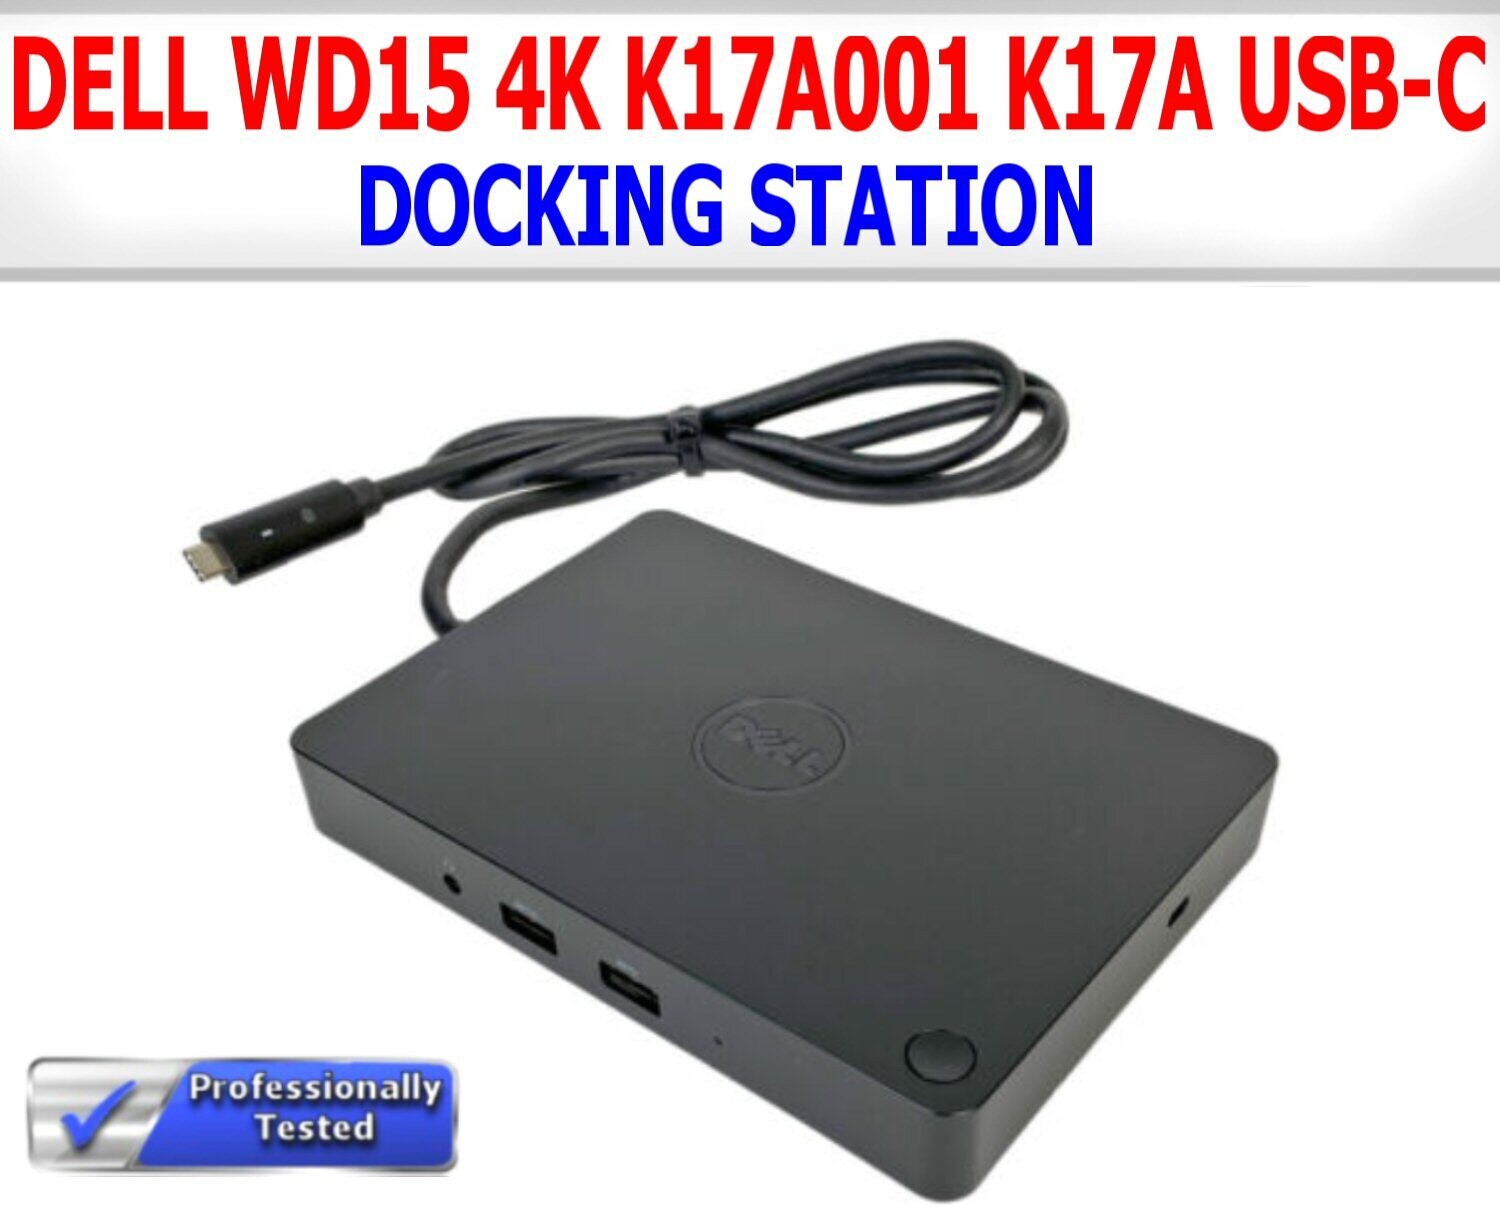 DELL WD15 4K K17A001 K17A USB-C DOCKING STATION 130W AC ADAPTER W/EXTRAS  TESTED | Store | Omaha Computing Solutions